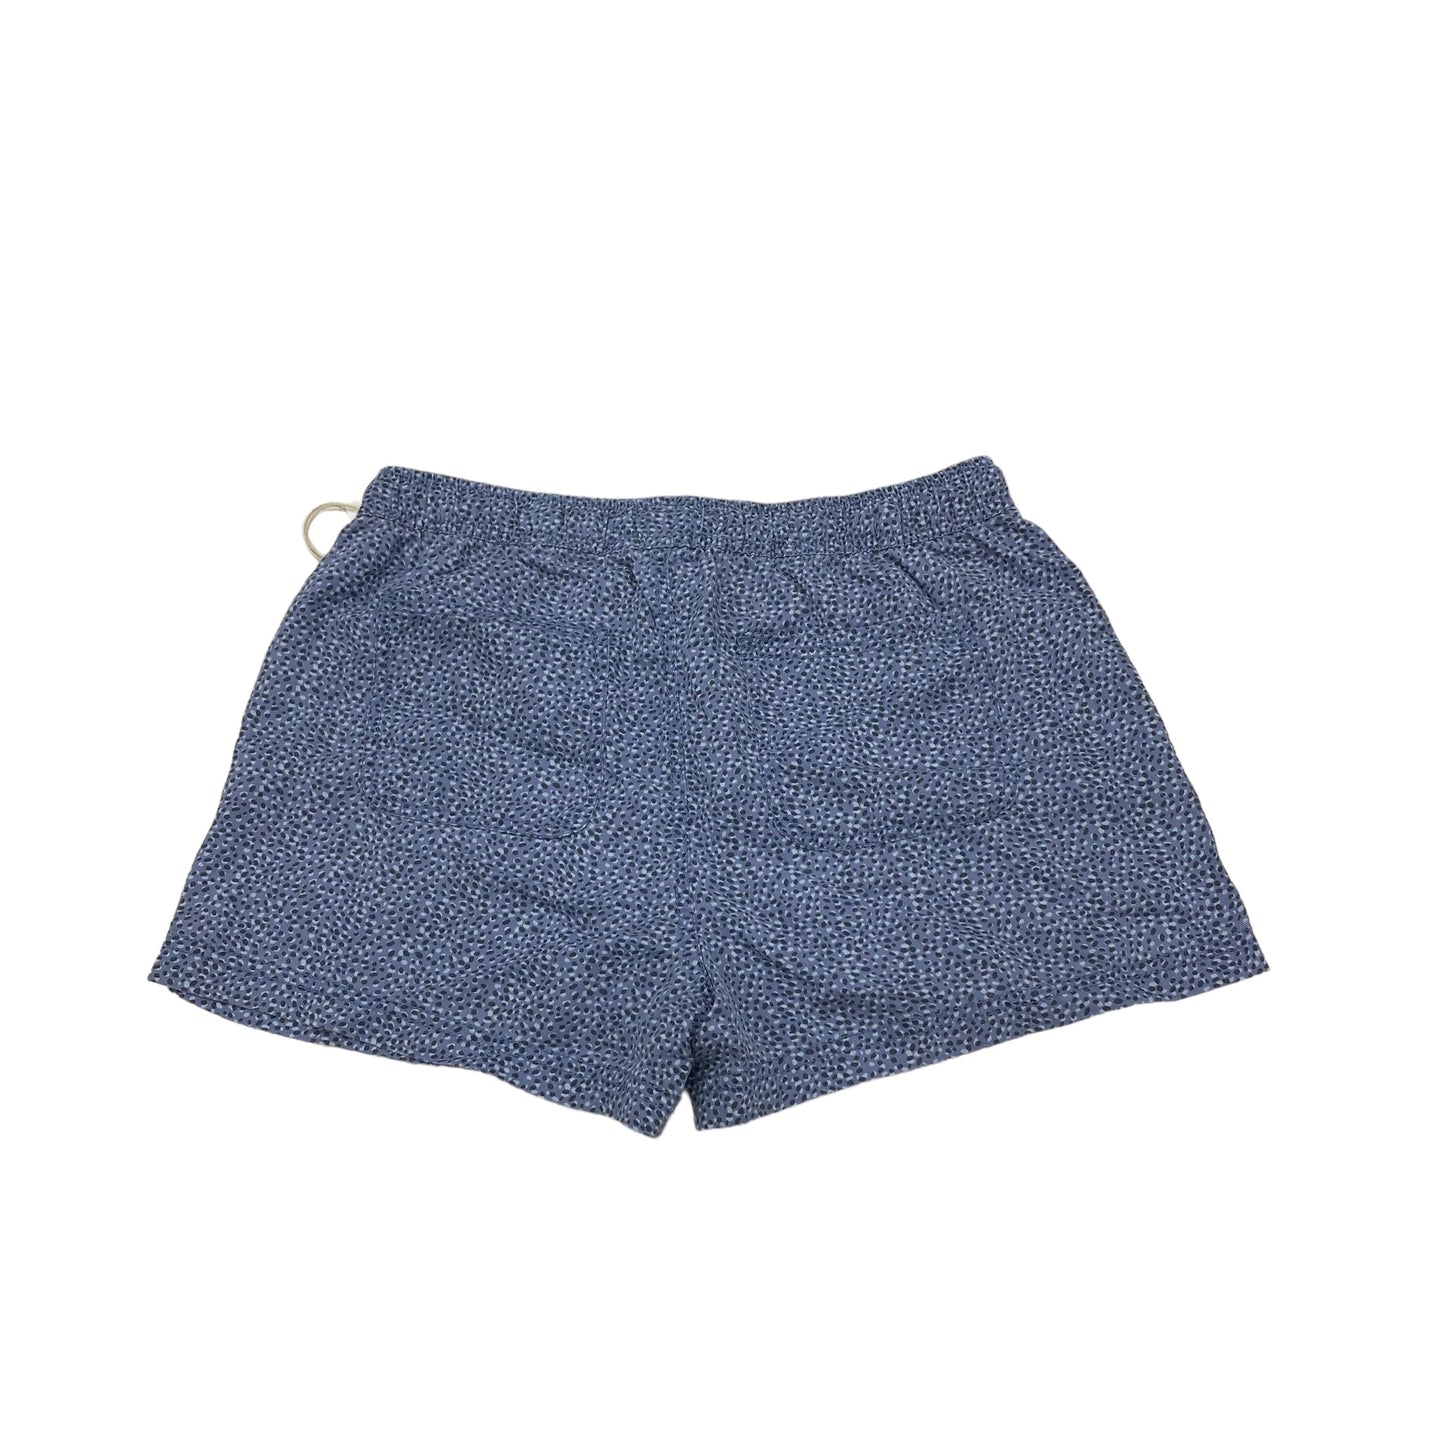 Blue Shorts C And C, Size S